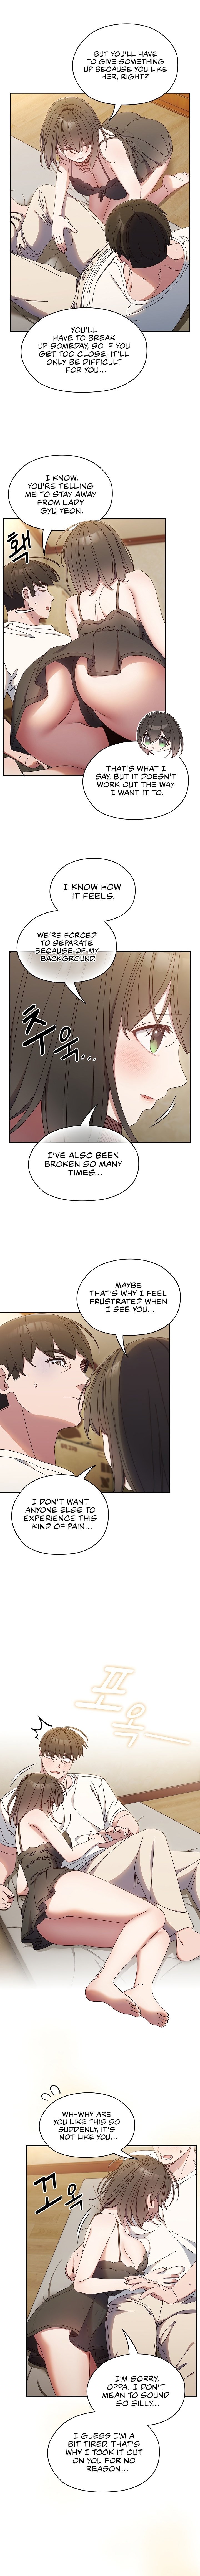 boss-give-me-your-daughter-chap-25-8